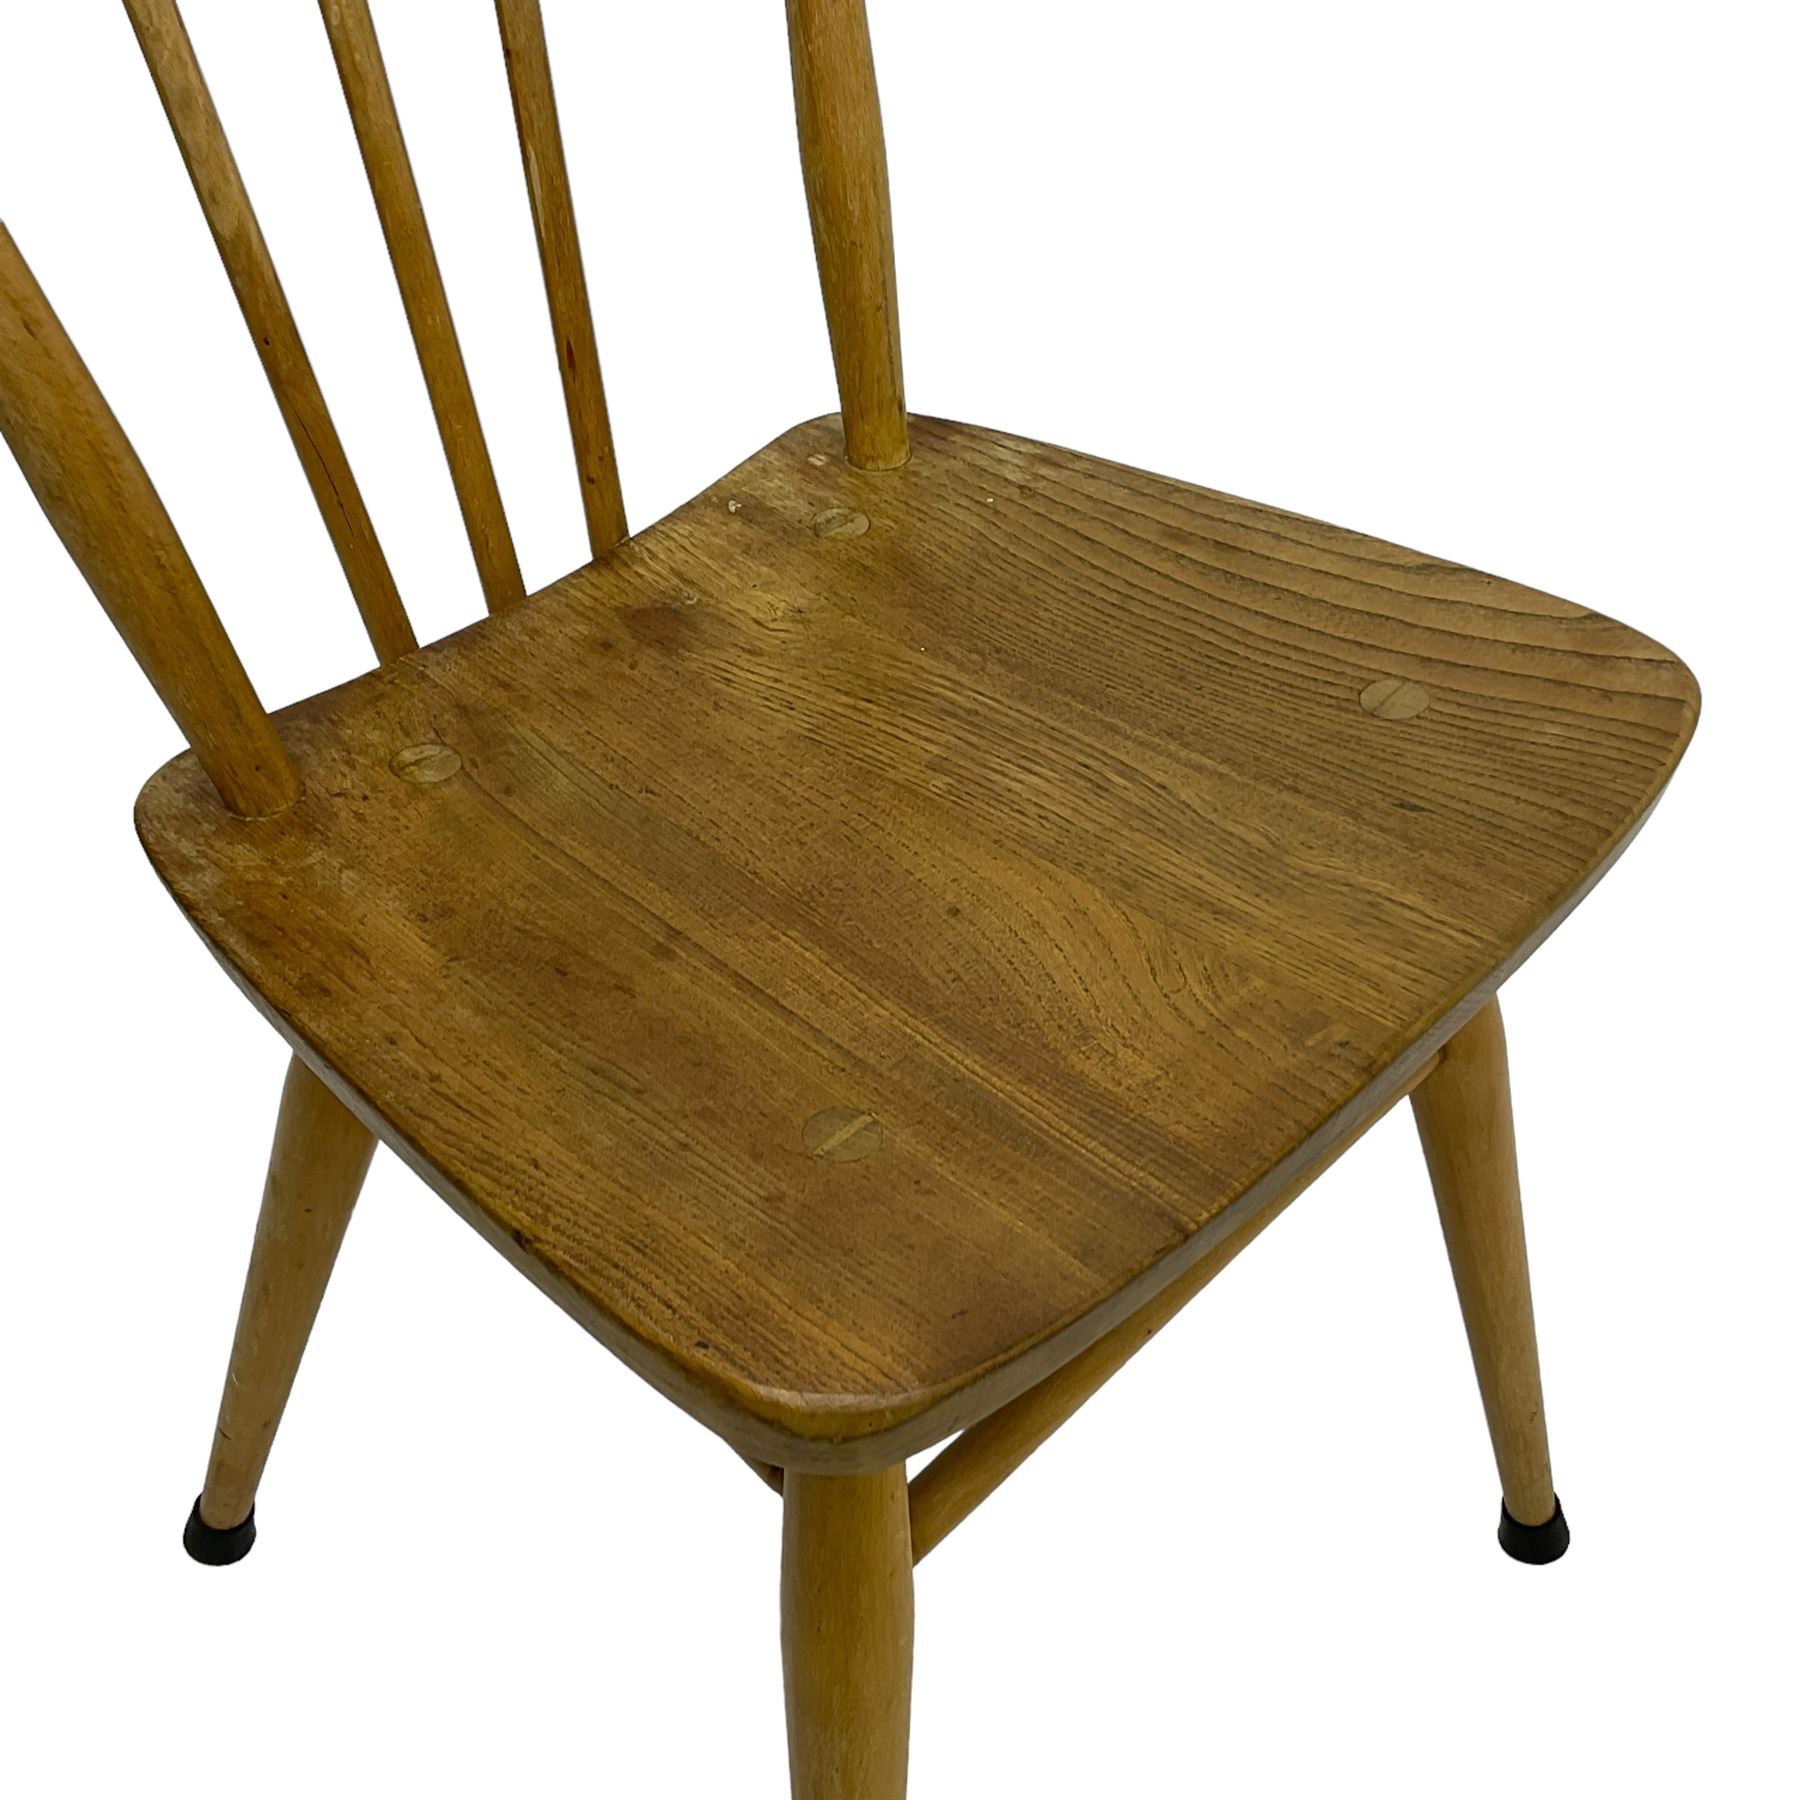 Ercol - set of three elm and beech model '391 All-Purpose Windsor Chairs' - Image 5 of 5